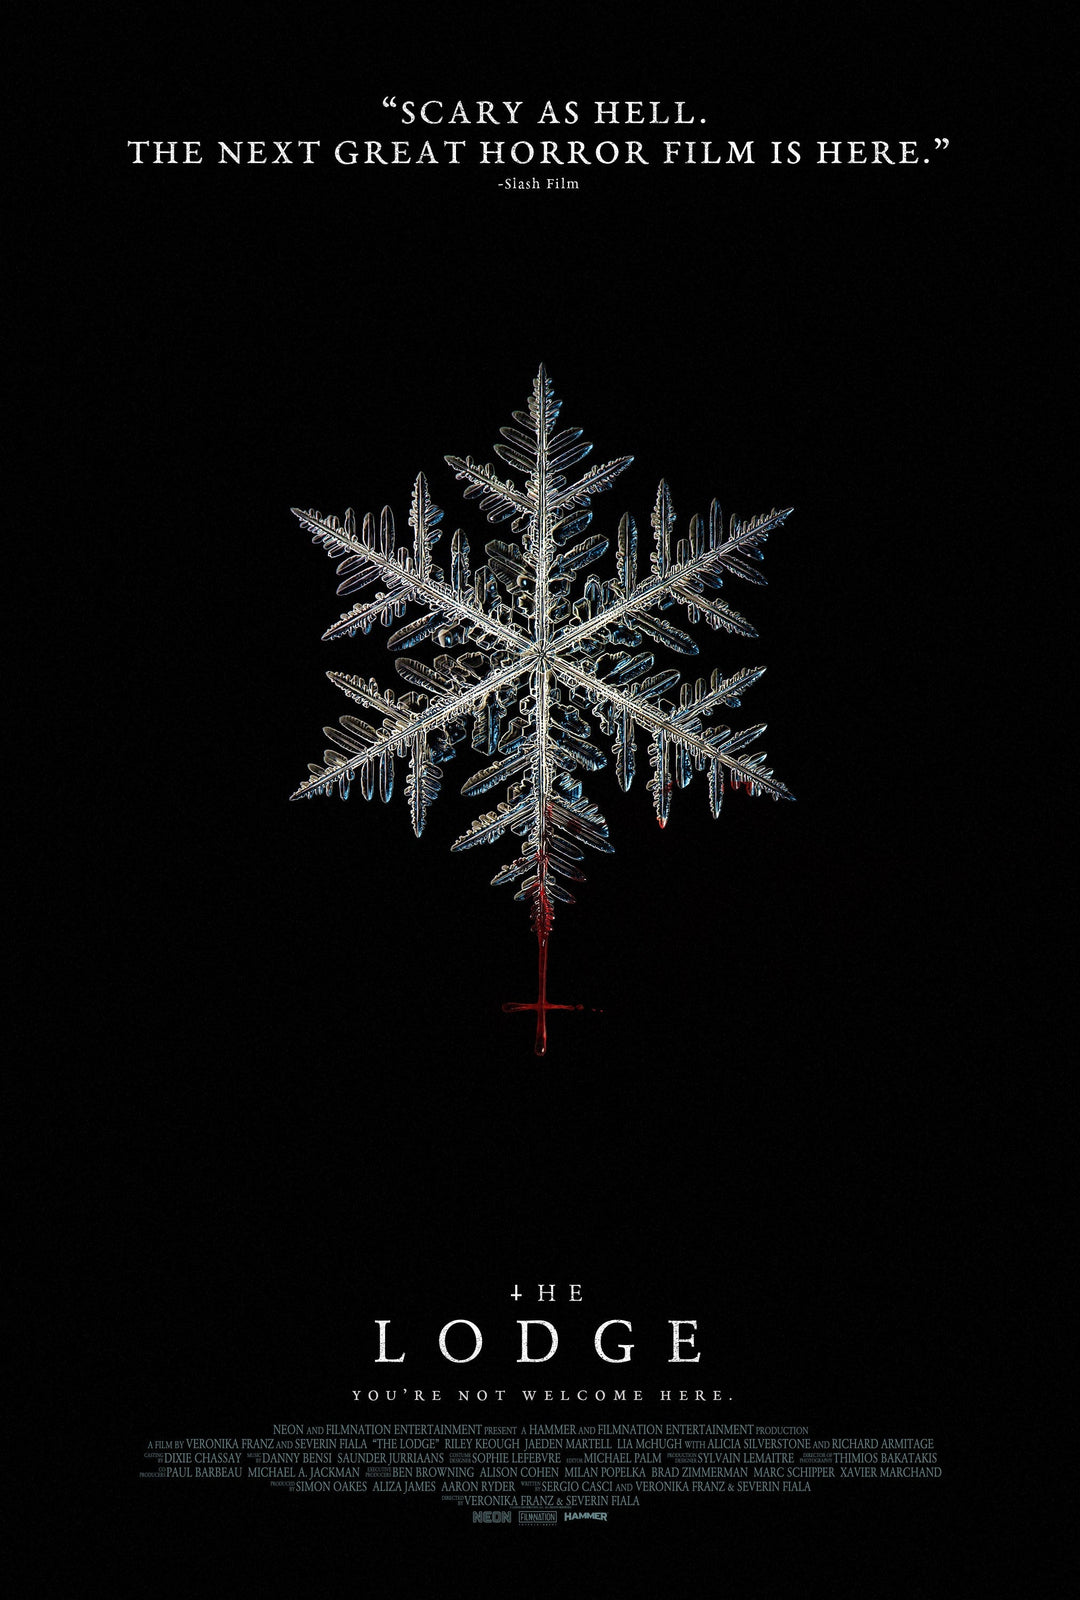 Poster reveal for "The Lodge"